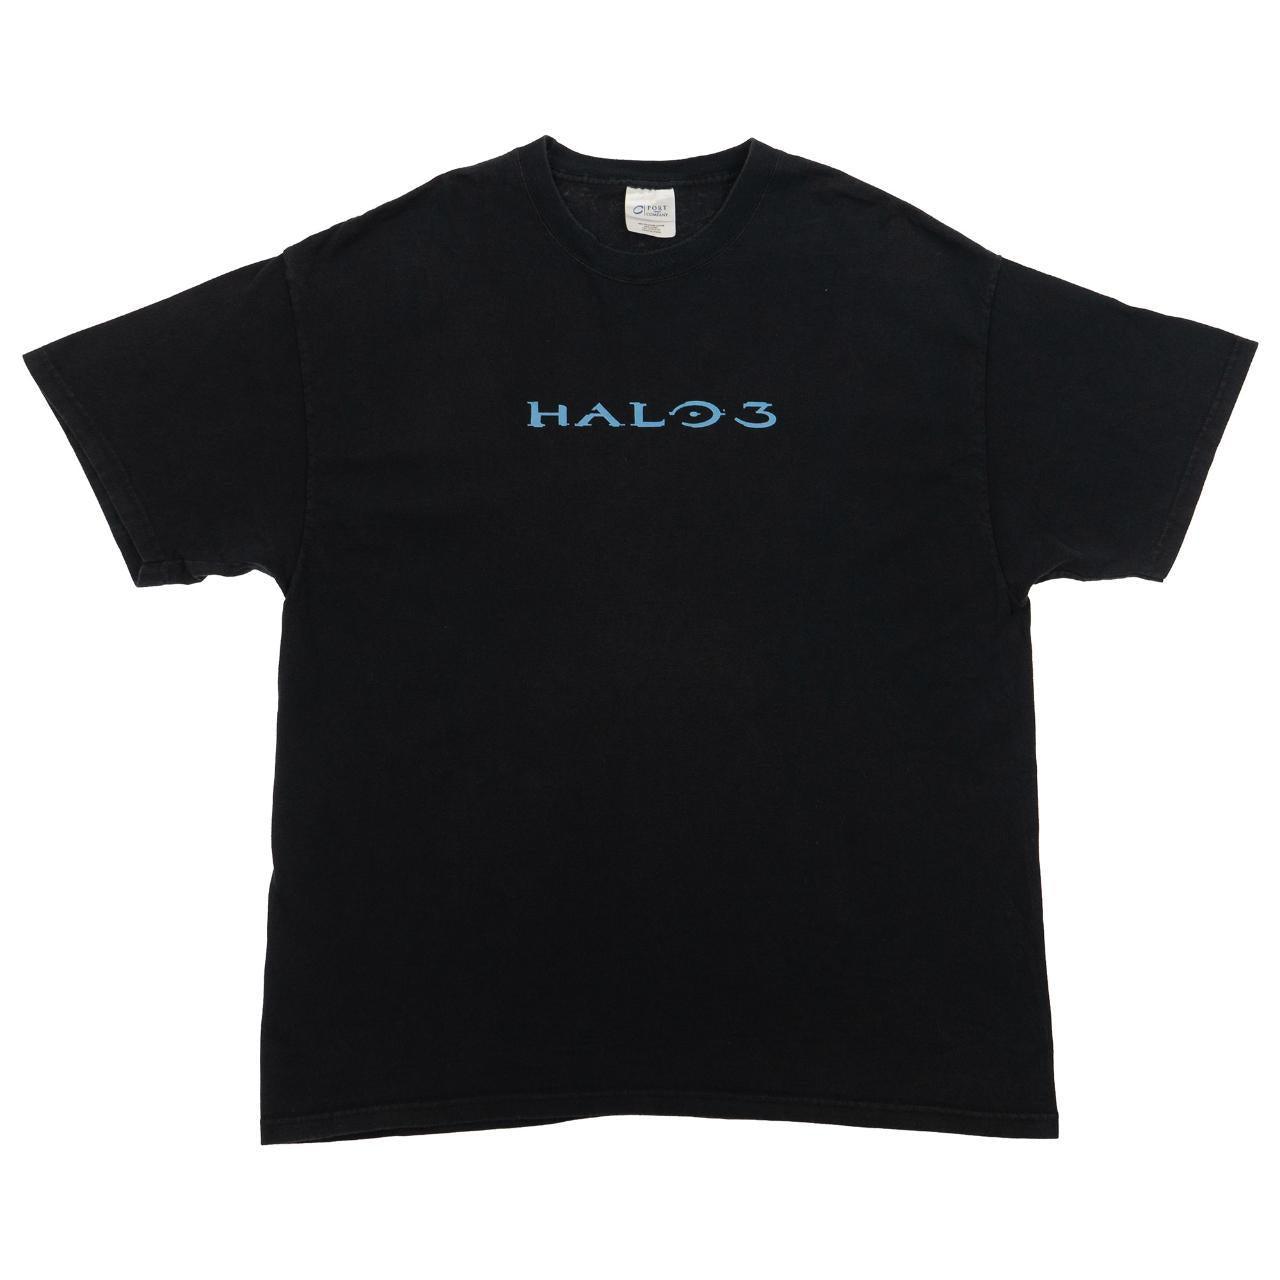 Vintage Halo 3 Graphic T Shirt Size XL - Known Source